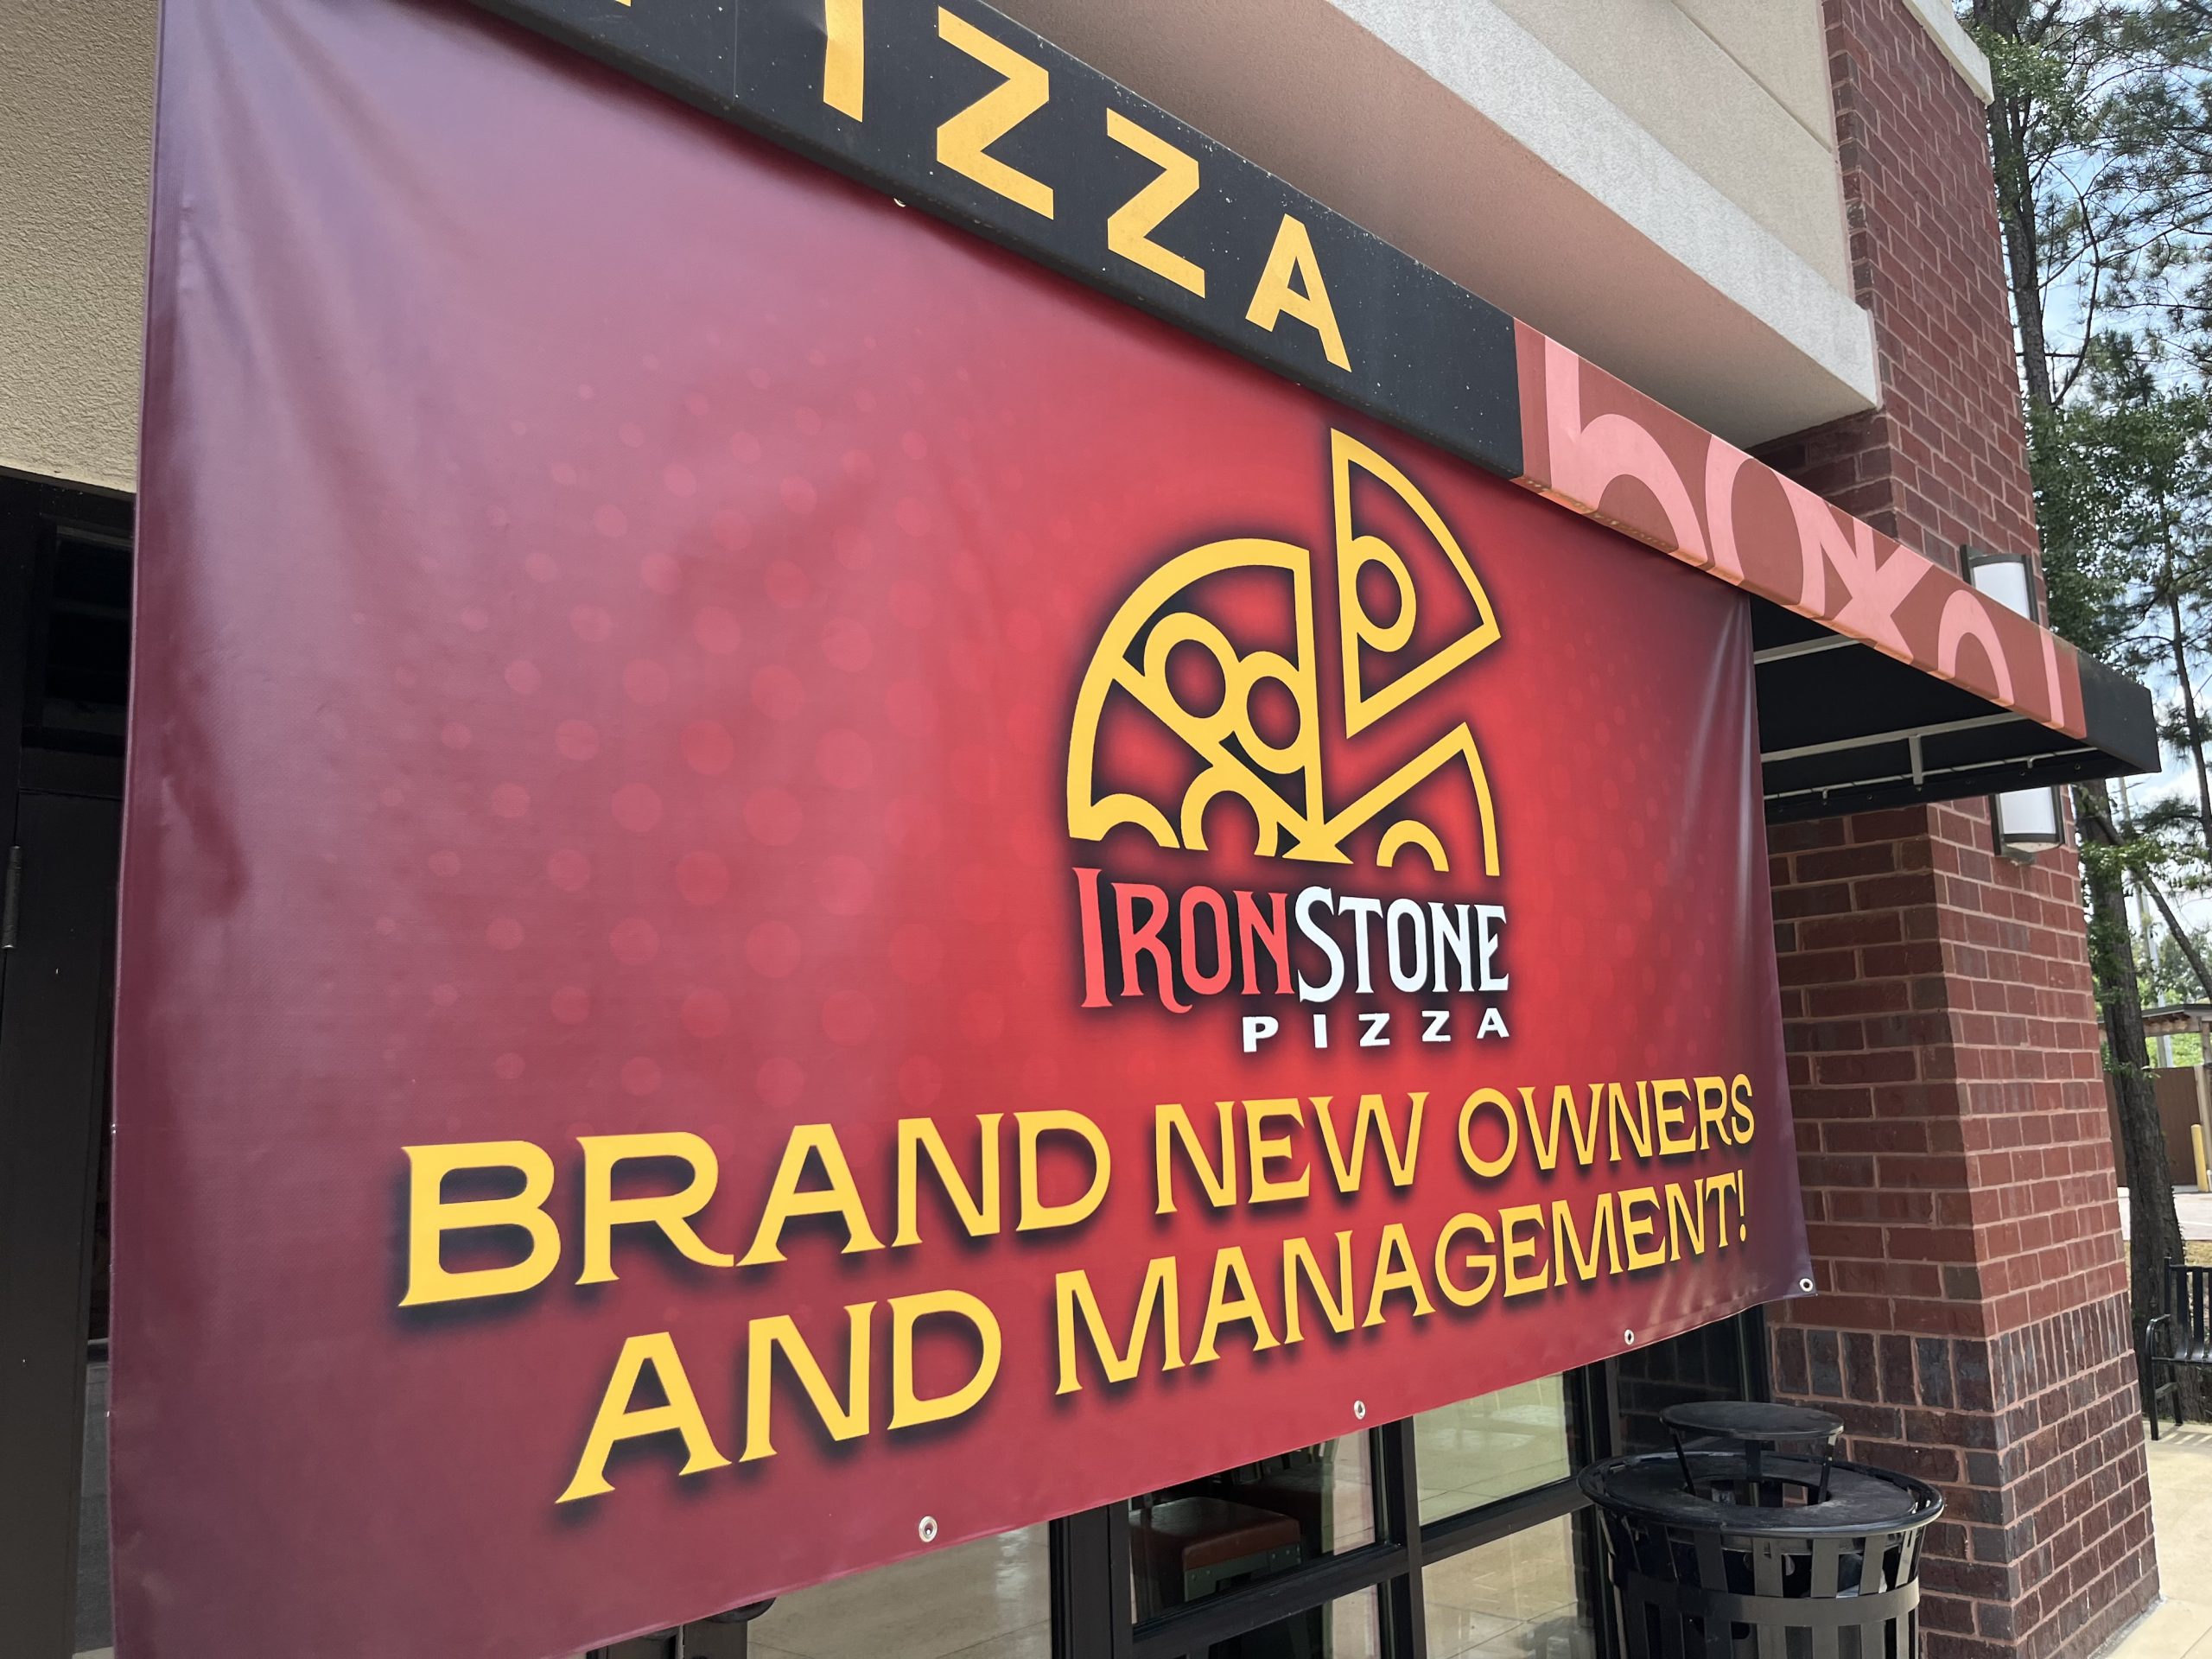 Ironstone Pizza in Trussville officially opens under new owners, management